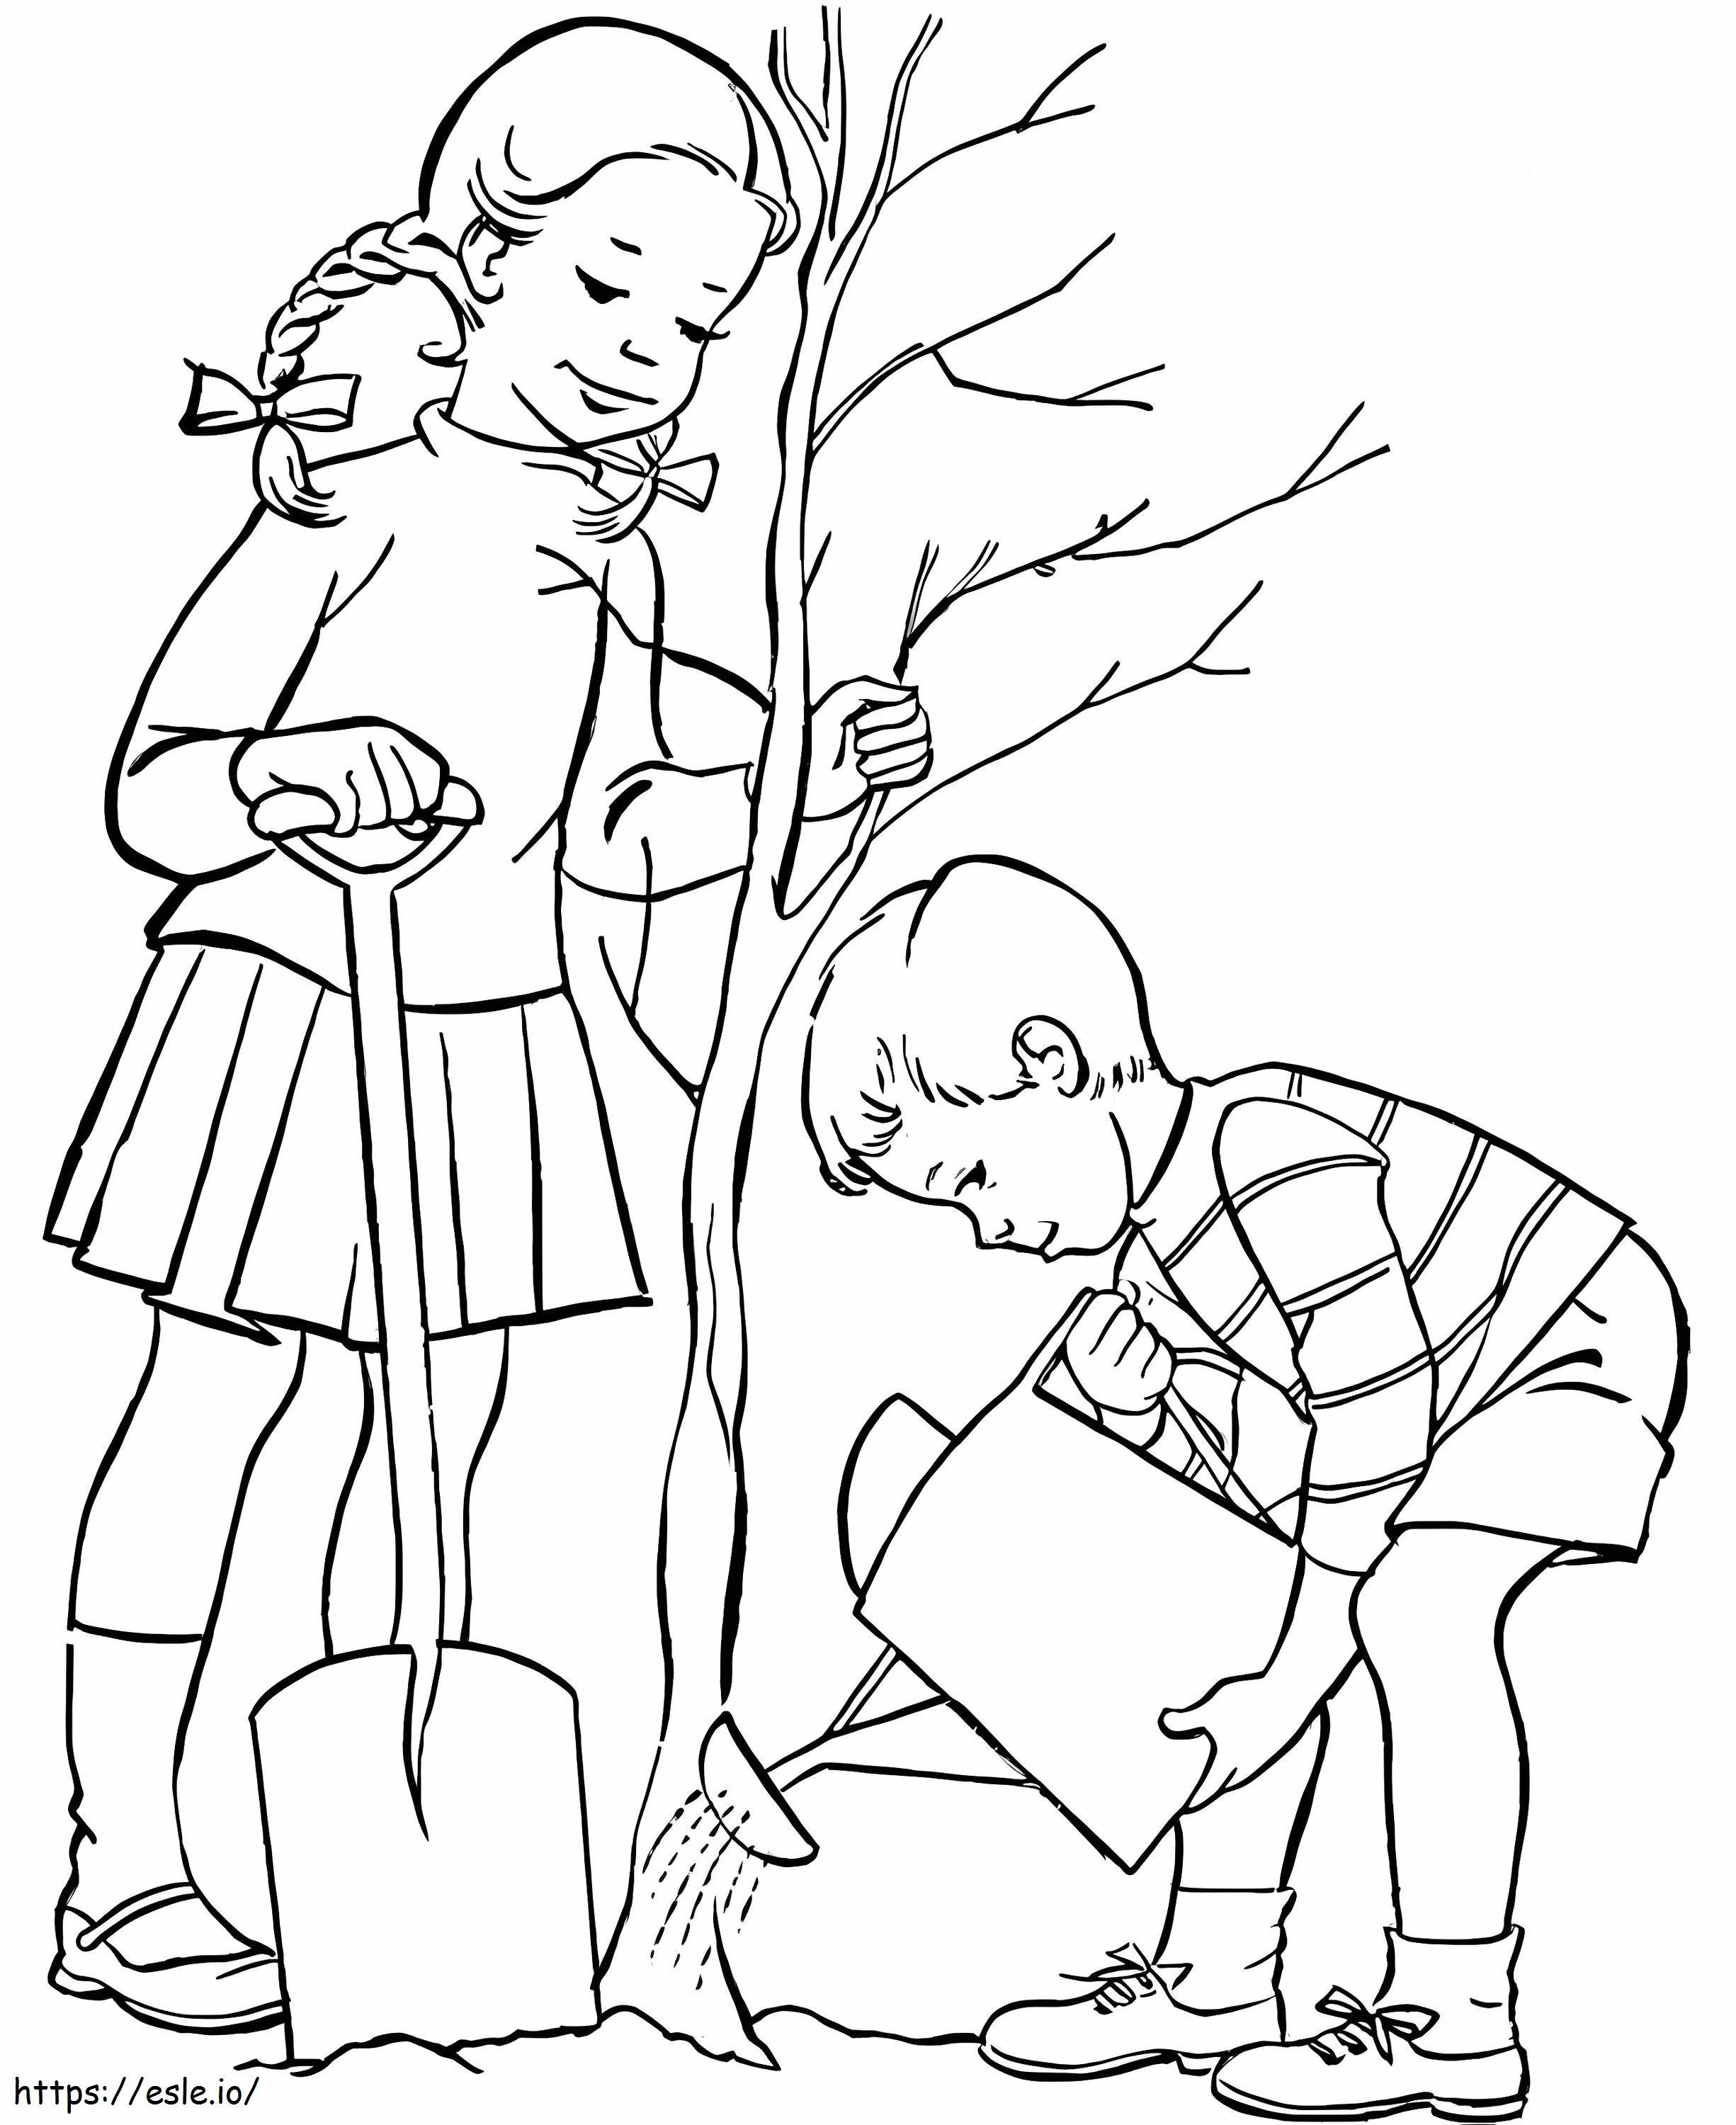 Children Planting Trees coloring page